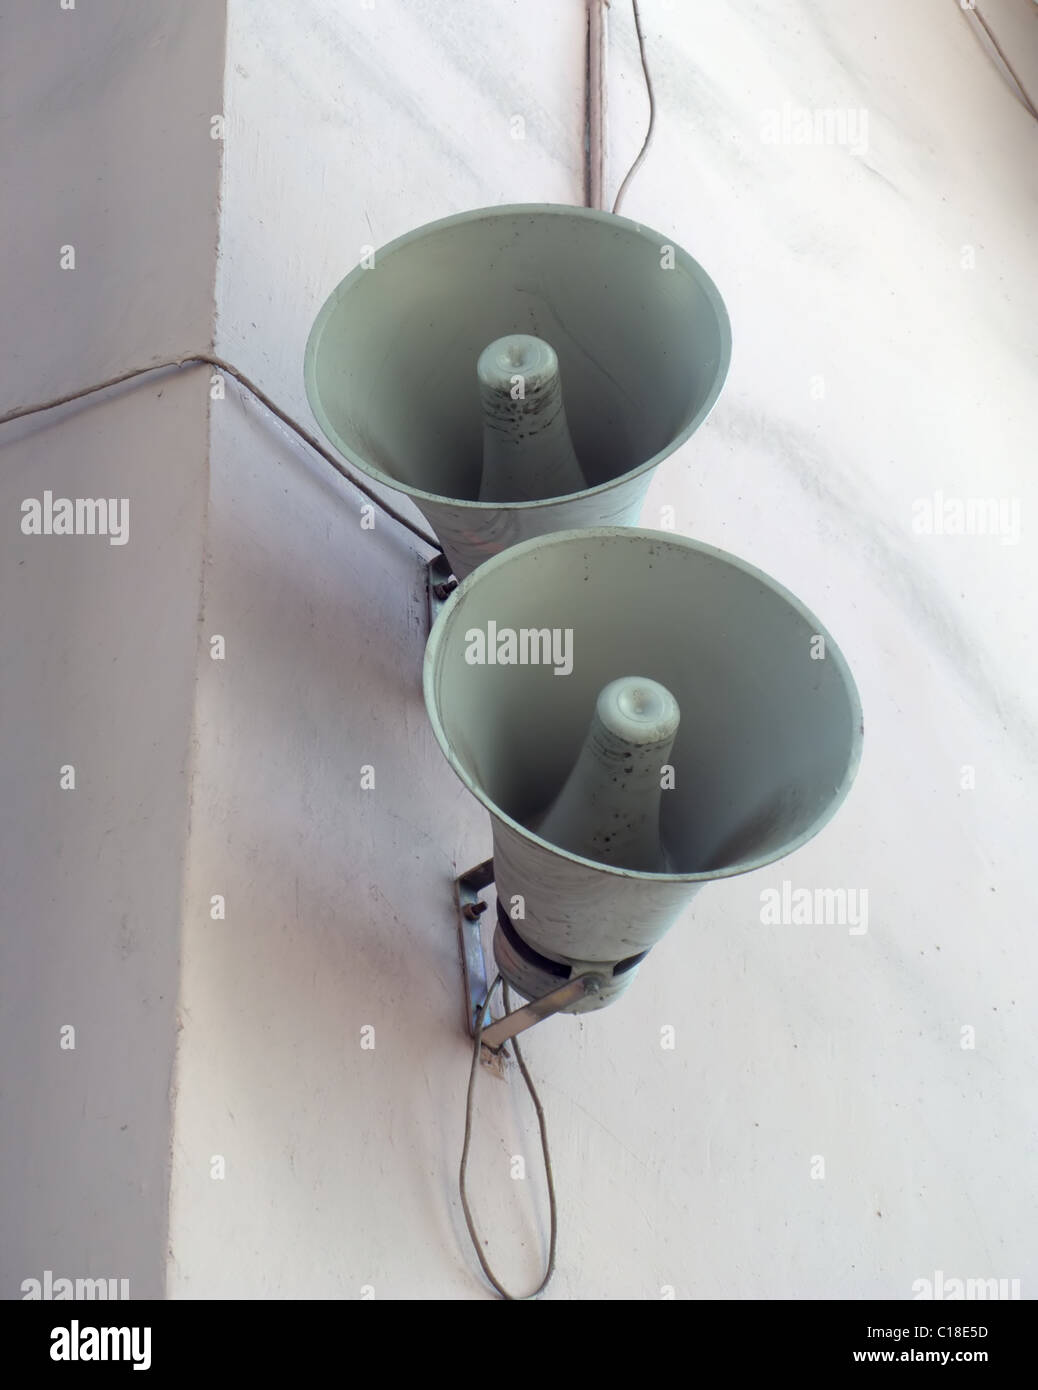 Two speakers are installed on a wall of a building Stock Photo